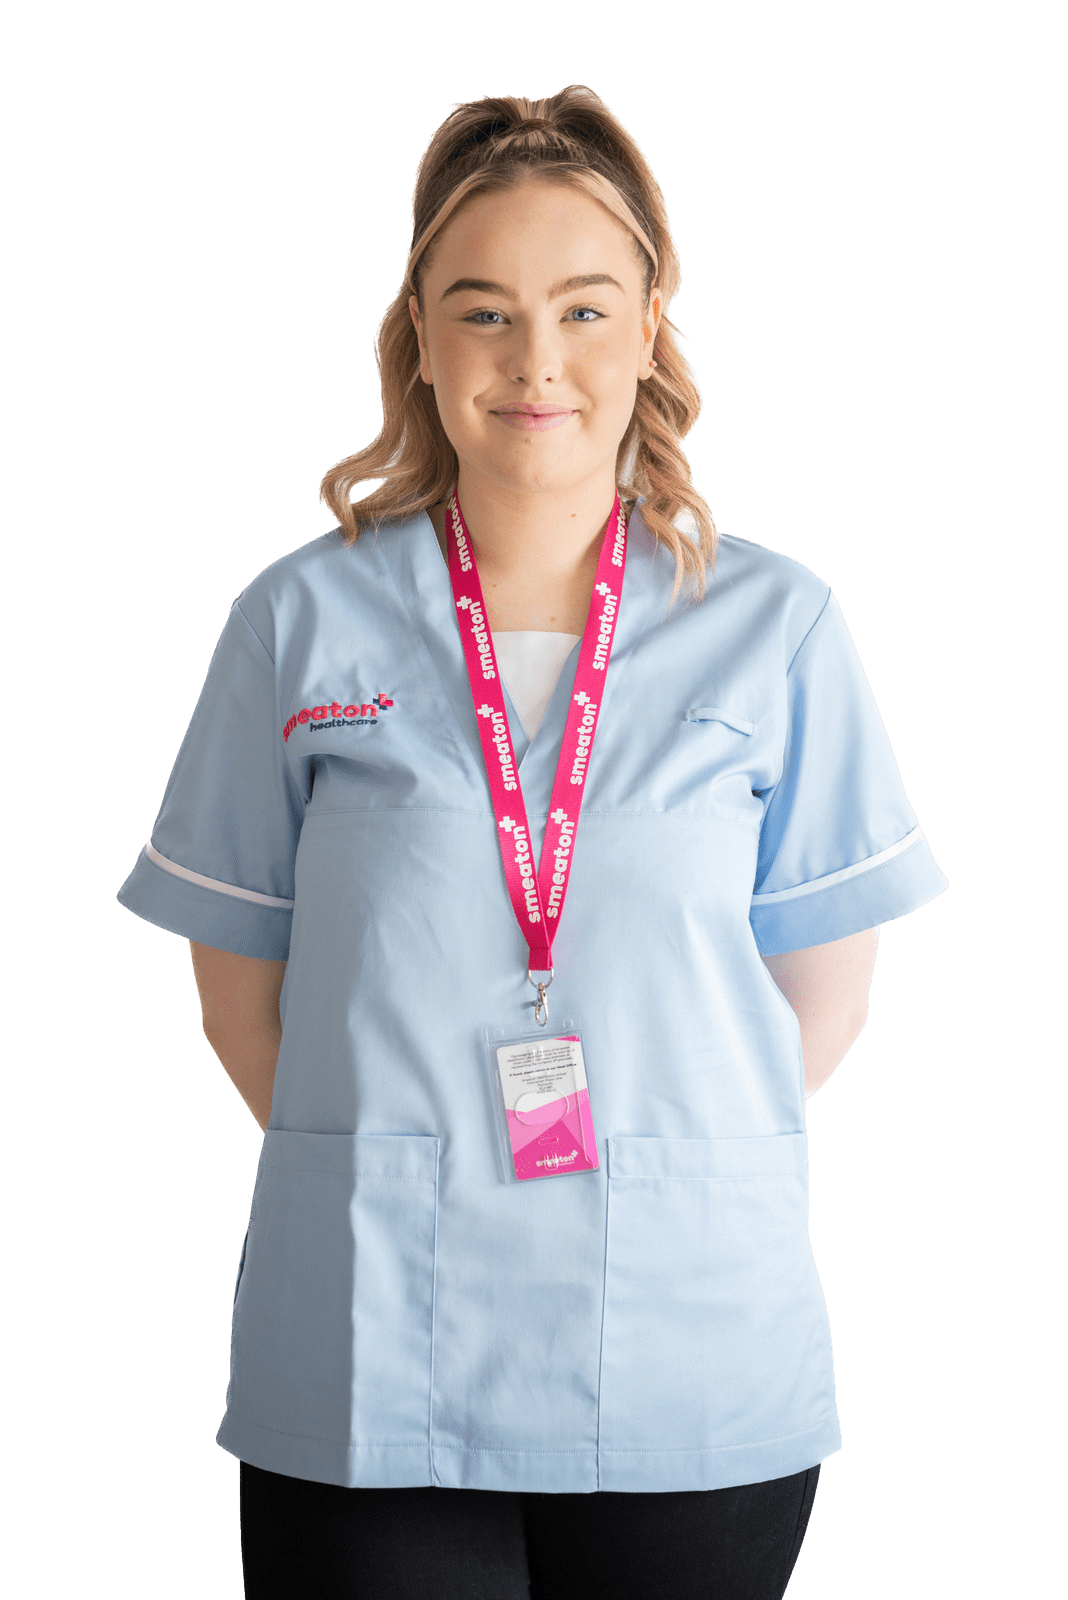 friendly care assistant or support worker